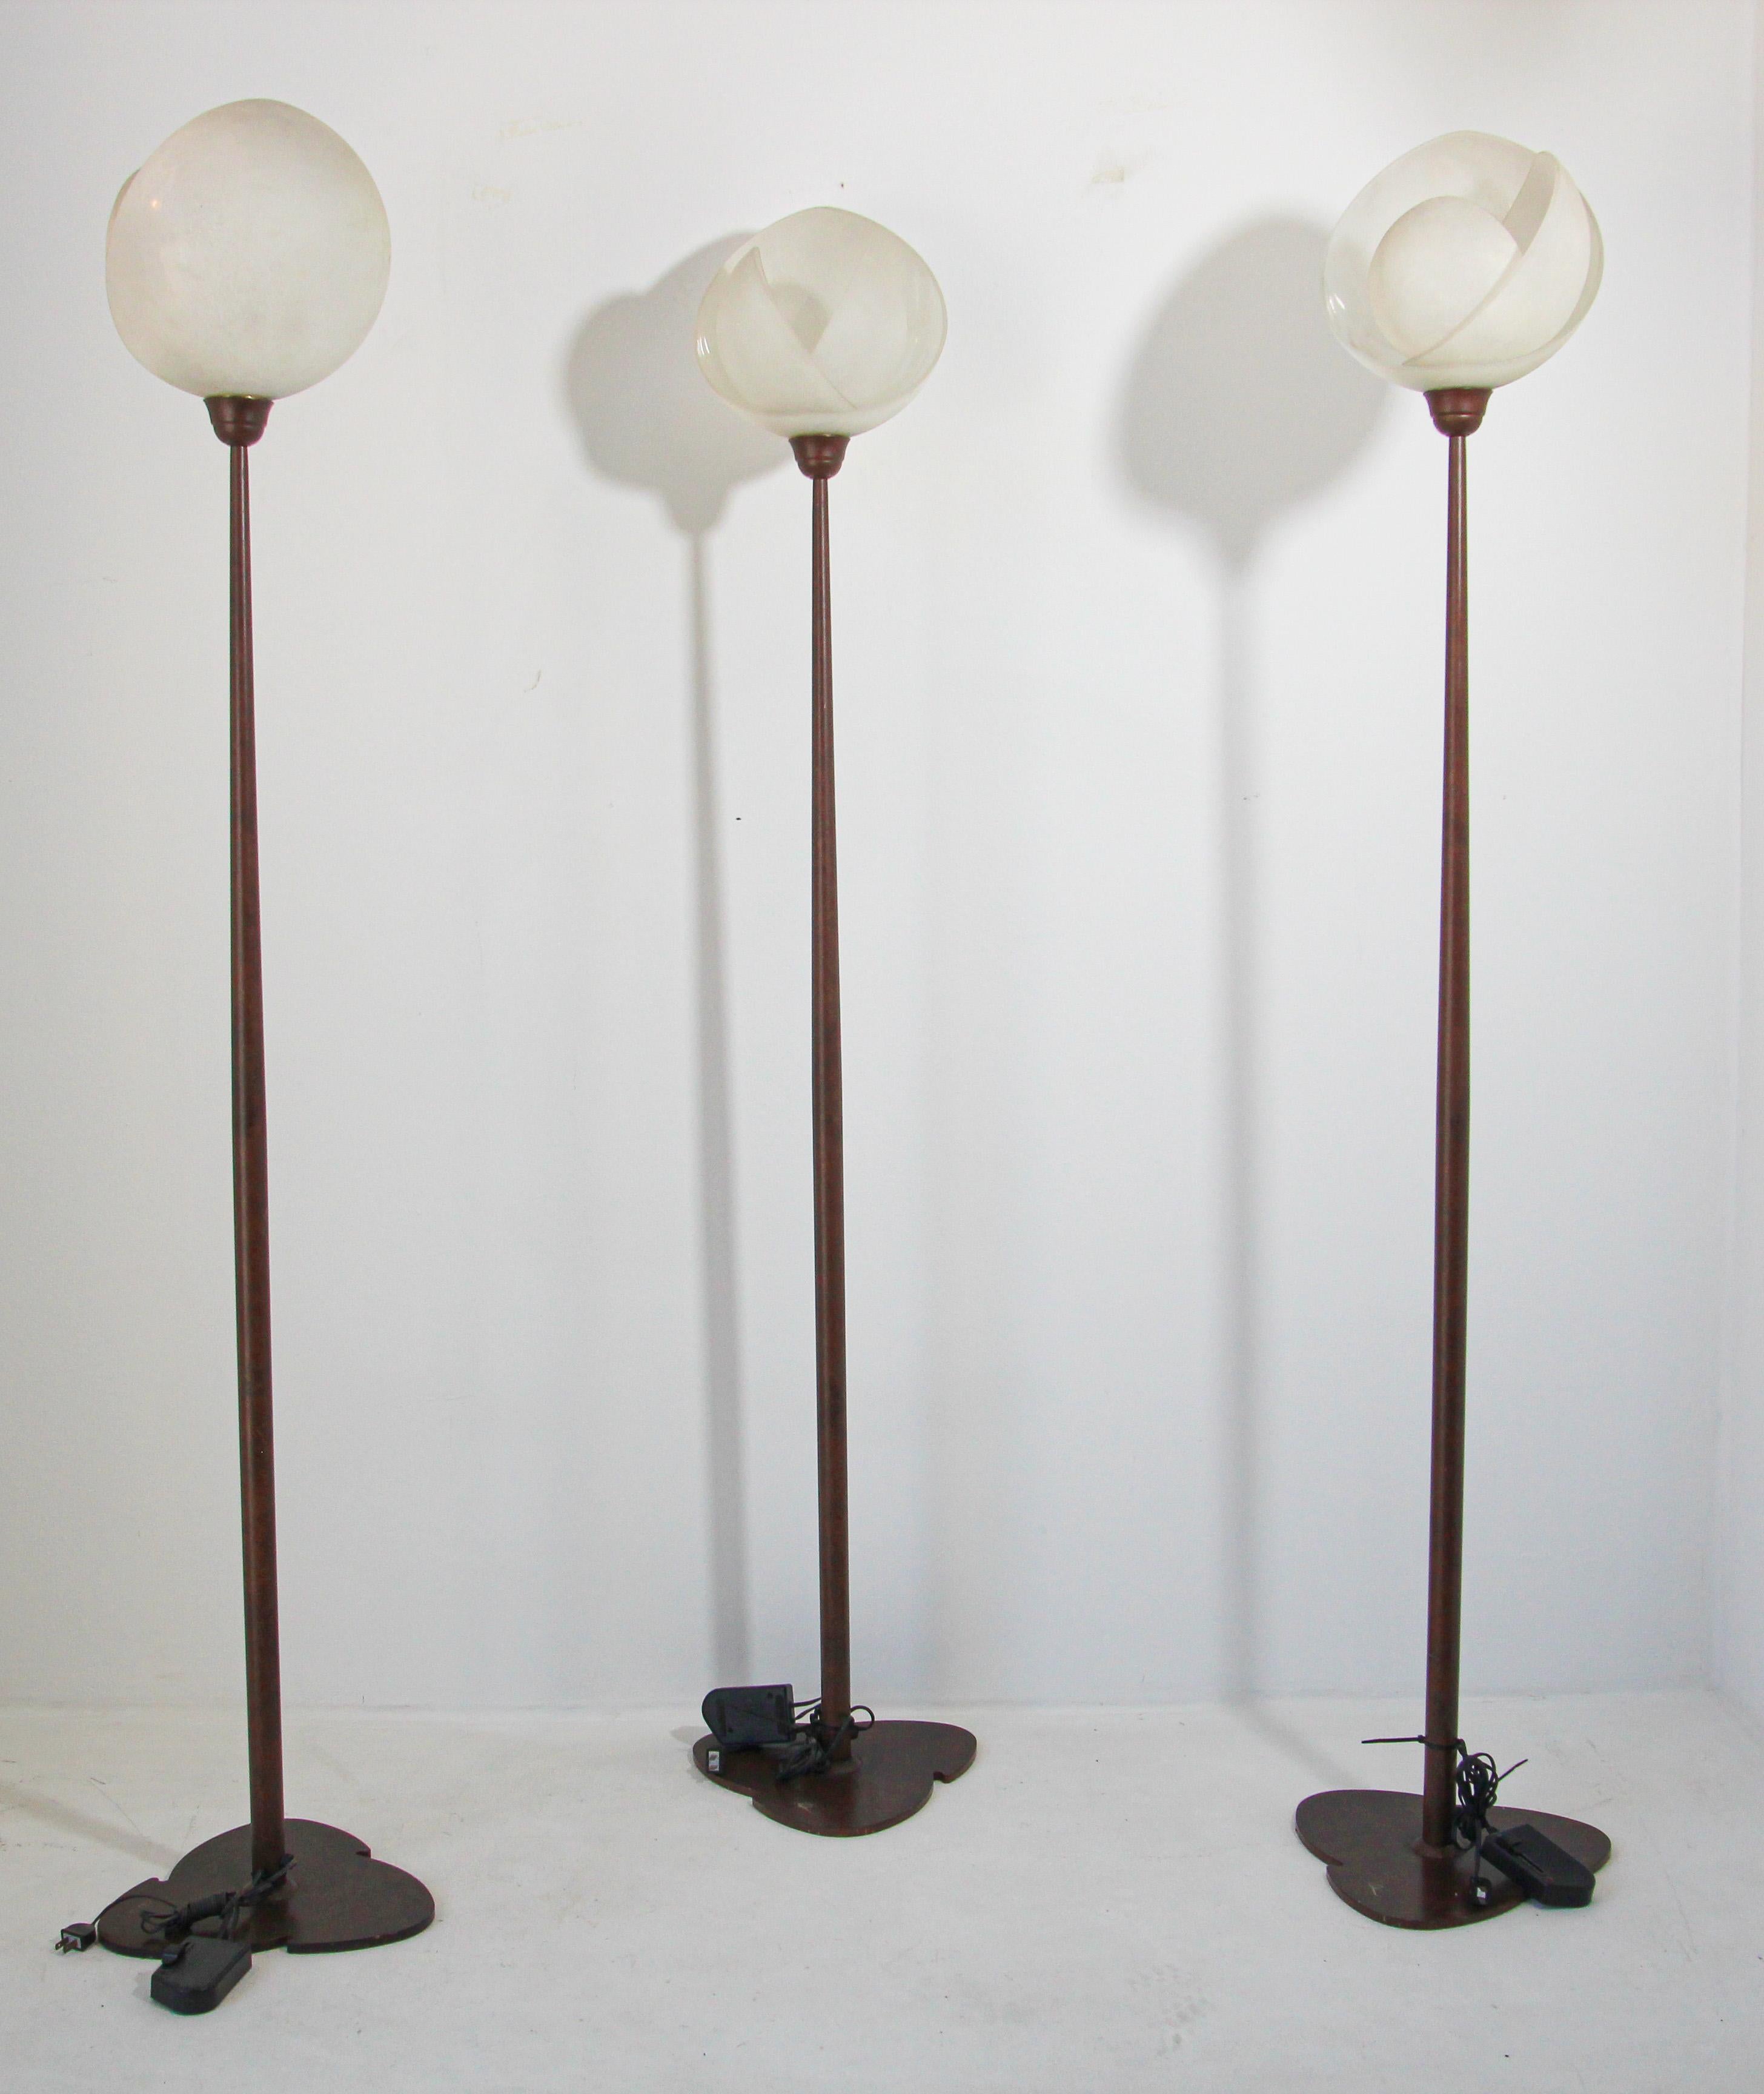 Italian Murano frosted glass and bronze finish metal floor lamp produced by Relco Milano, 1980s.
Unusual 1980's bronze standing lamp featuring unusual frosted textured glass in the shape of a flower, the glass moves around the light bulb to close